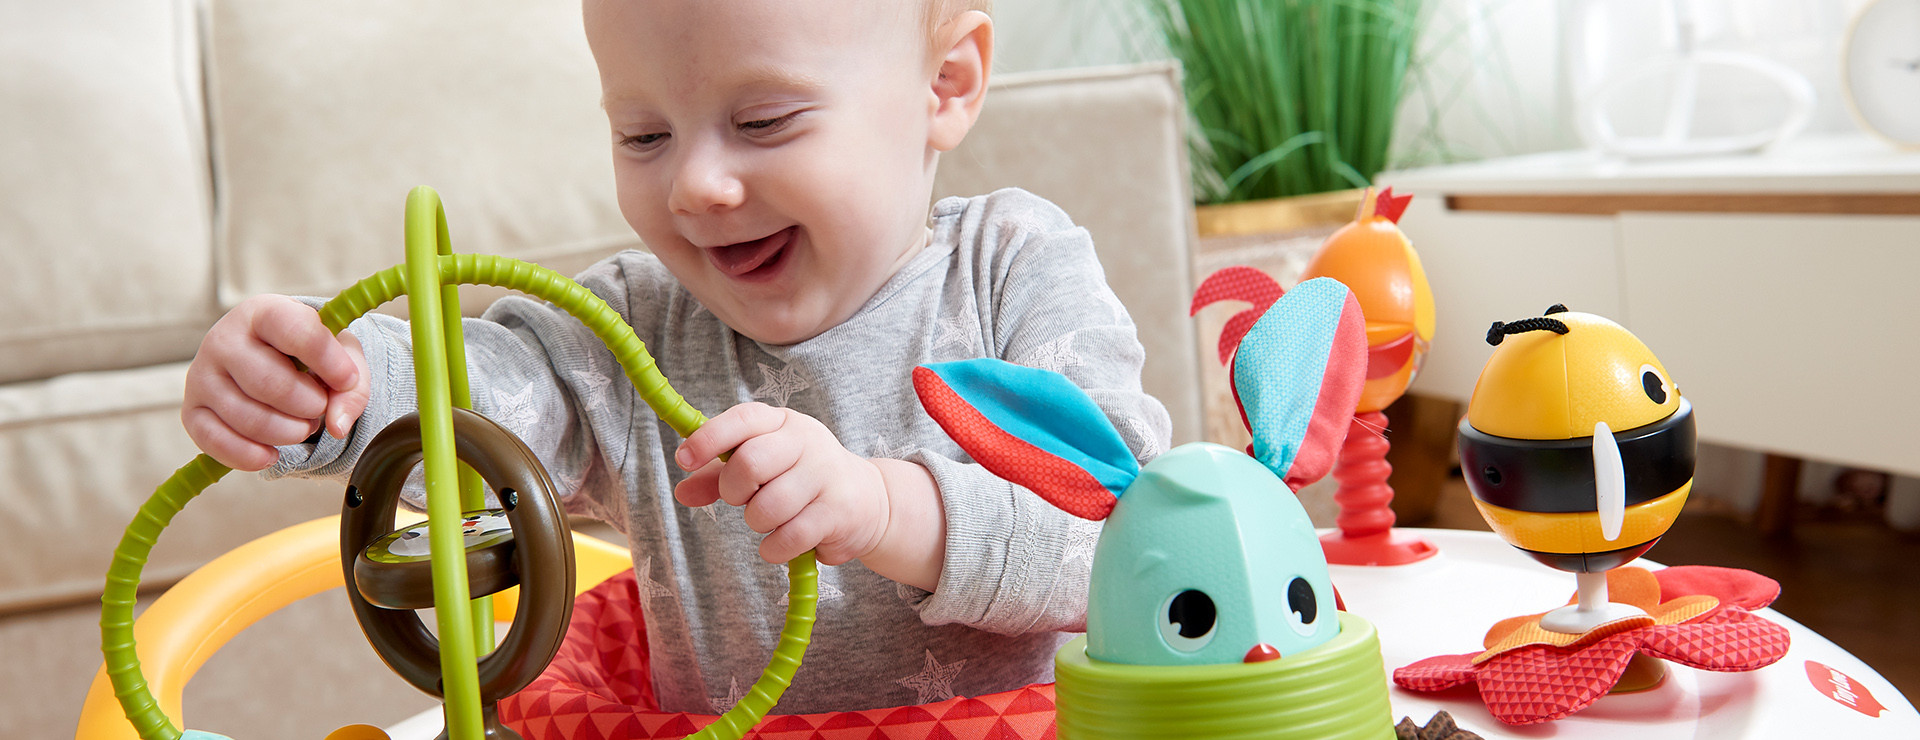 Toy shapes and textures keep baby engaged and entertained